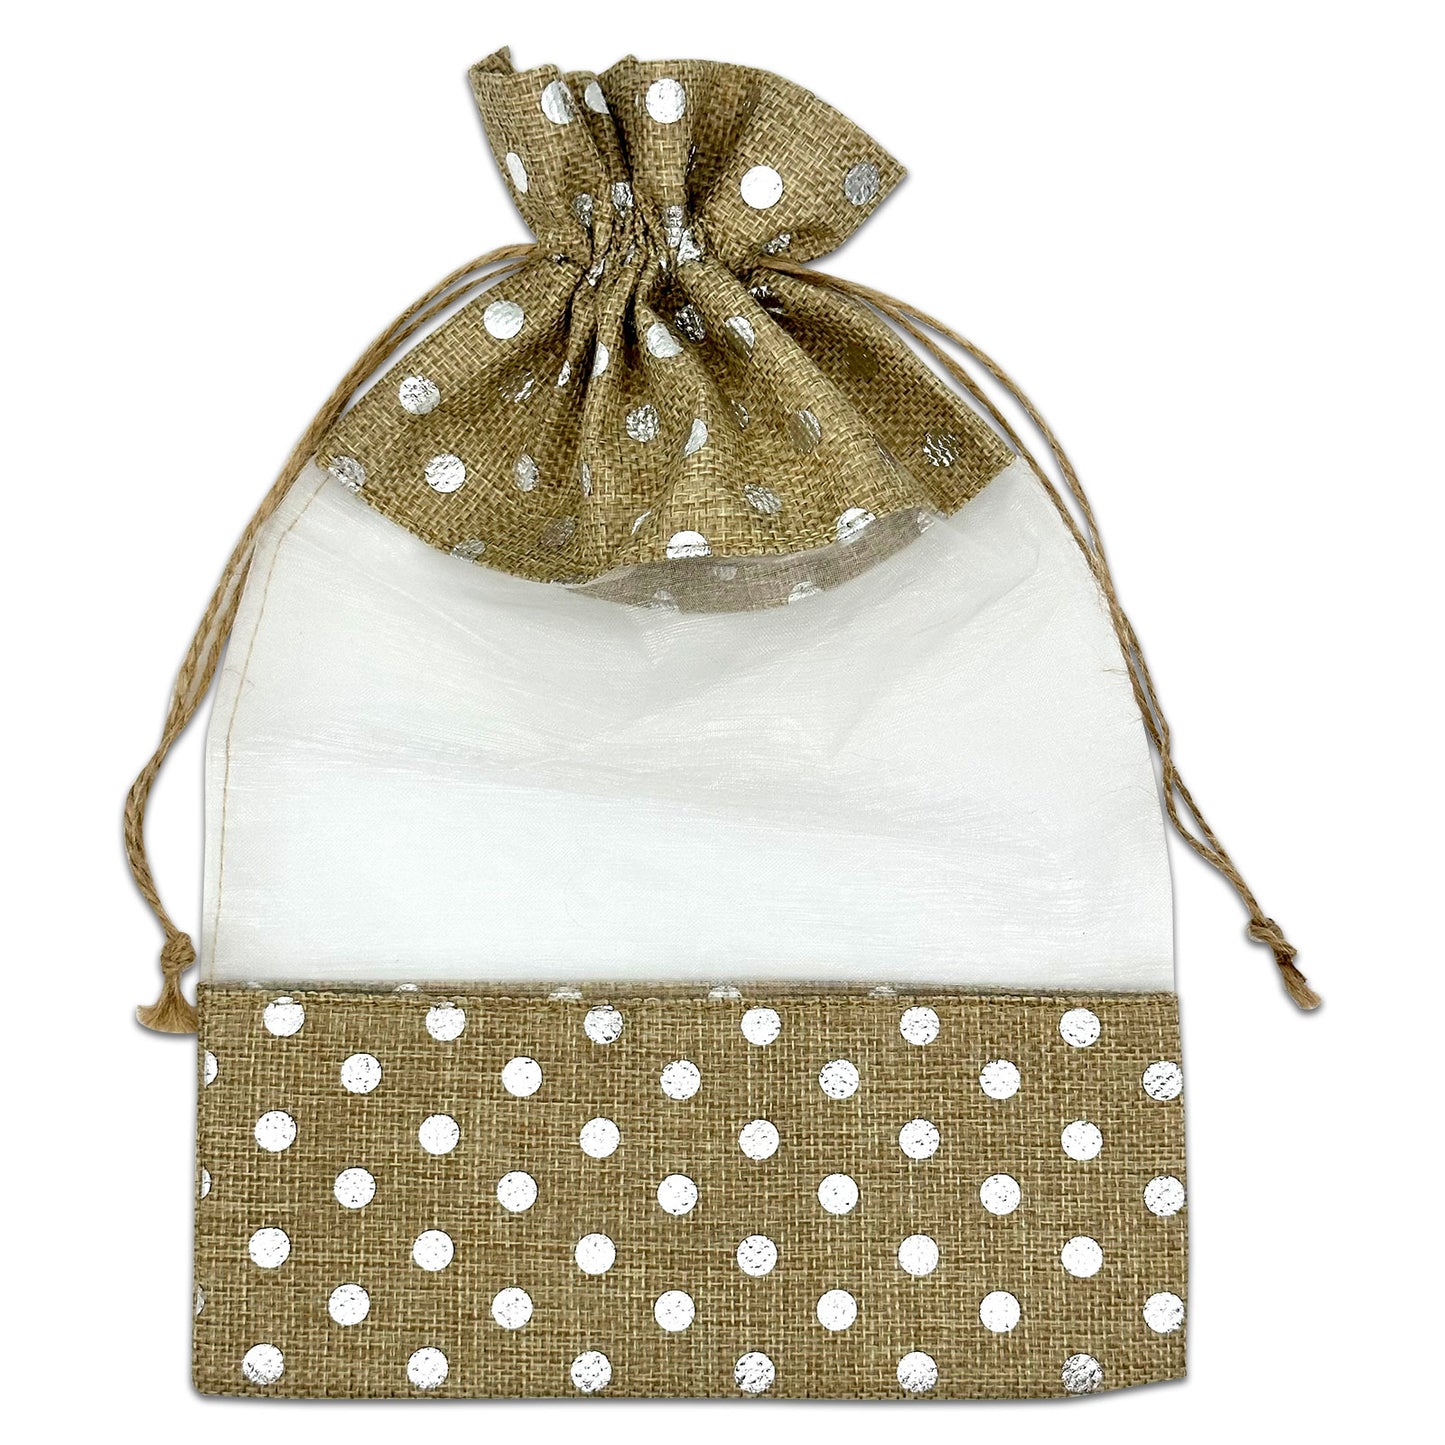 7 1/2" x 11 1/2" Beige with Silver Polka Dot Linen Burlap and Sheer Organza Gift Bag